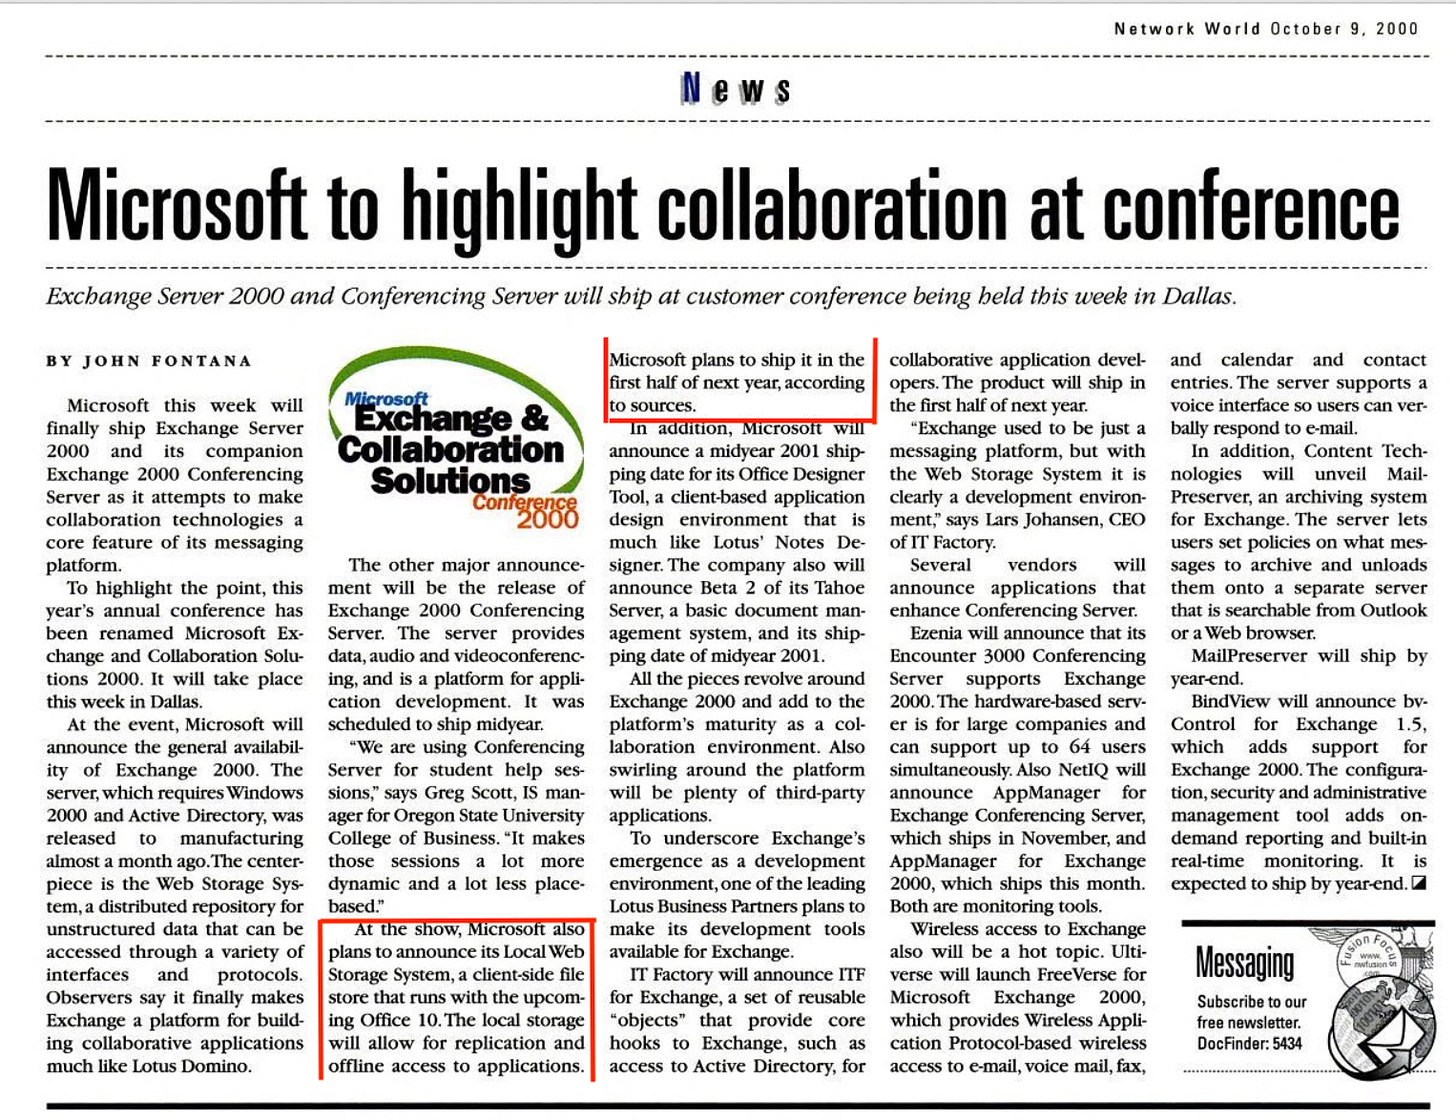 Microsoft to highlight collaboration at conference.